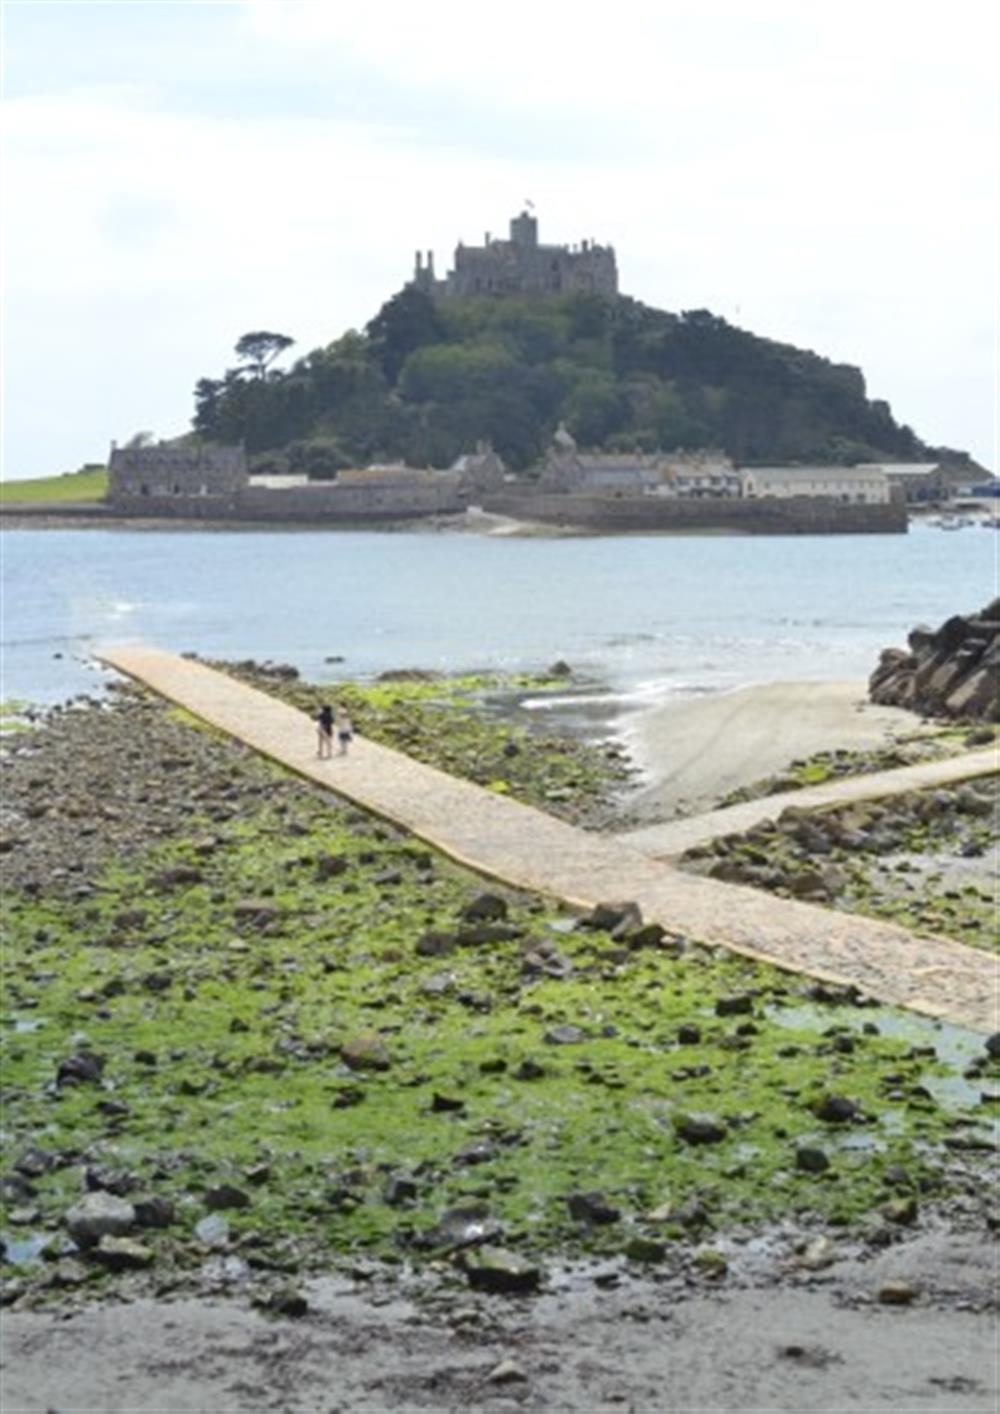 St Michael's Mount is 45 minutes away. Walk across the causeway or catch the water-taxi across to the island. at Demelza 3 in Helford Passage